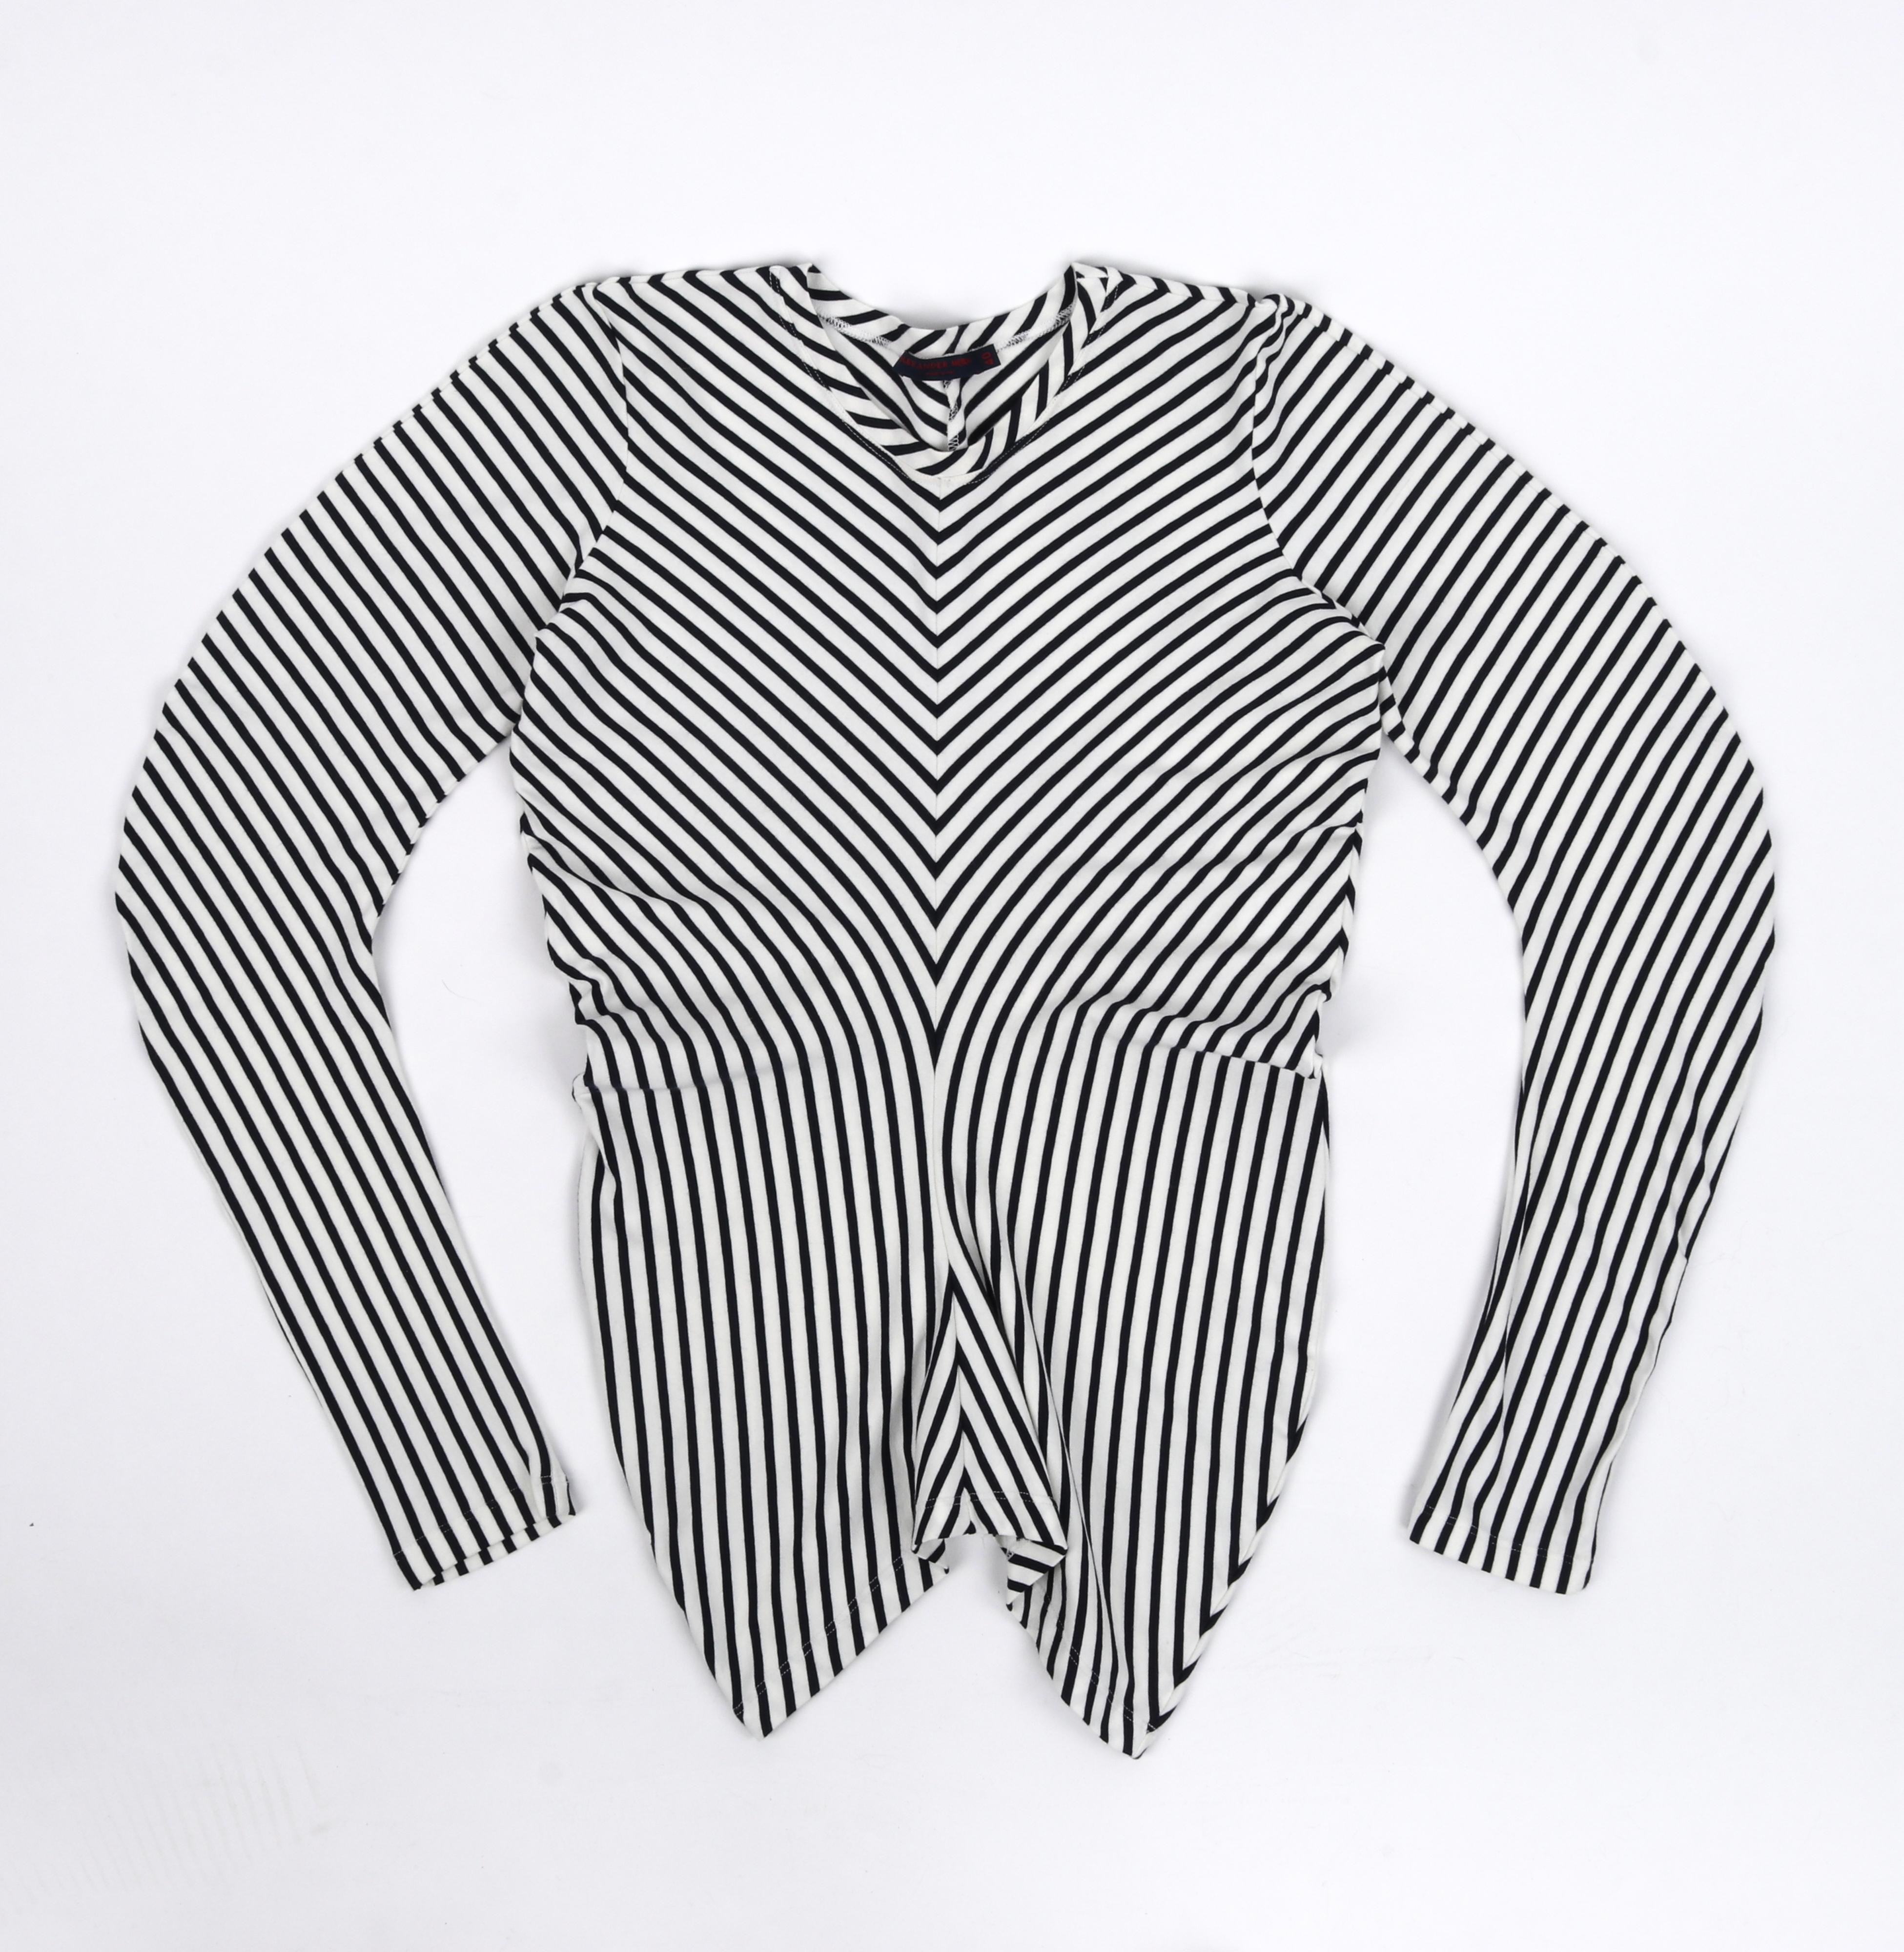 ALEXANDER McQUEEN S/S 2006 Blue White Stripe Knit Curve Long Sleeve Draped Top For Sale 4